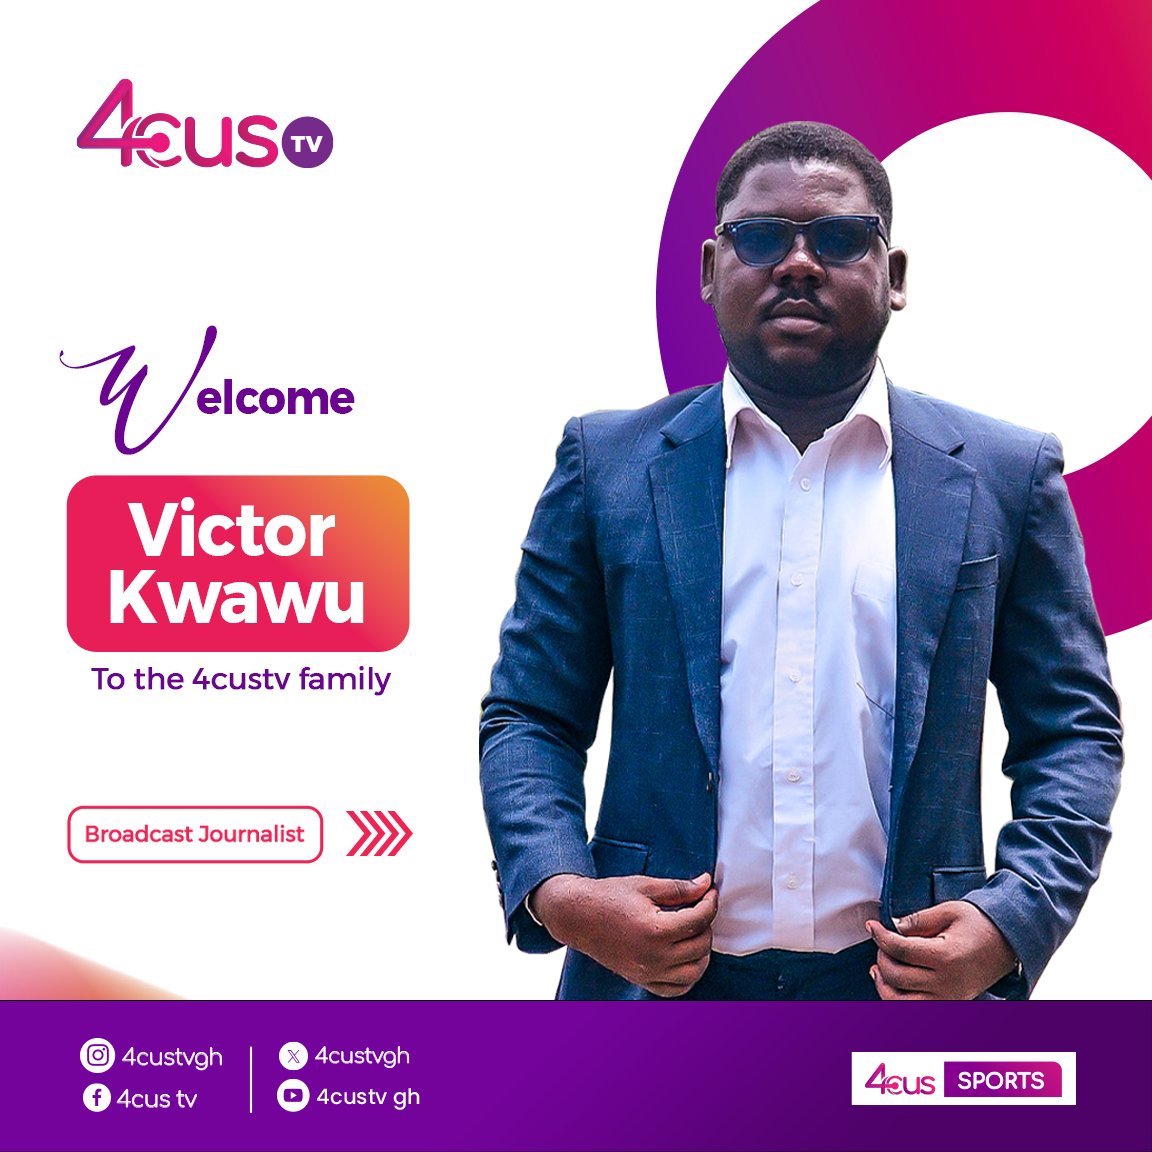 Welcome to the 4cus TV family @victor_kwawu 

#4cussports
#TheFocusIsYou